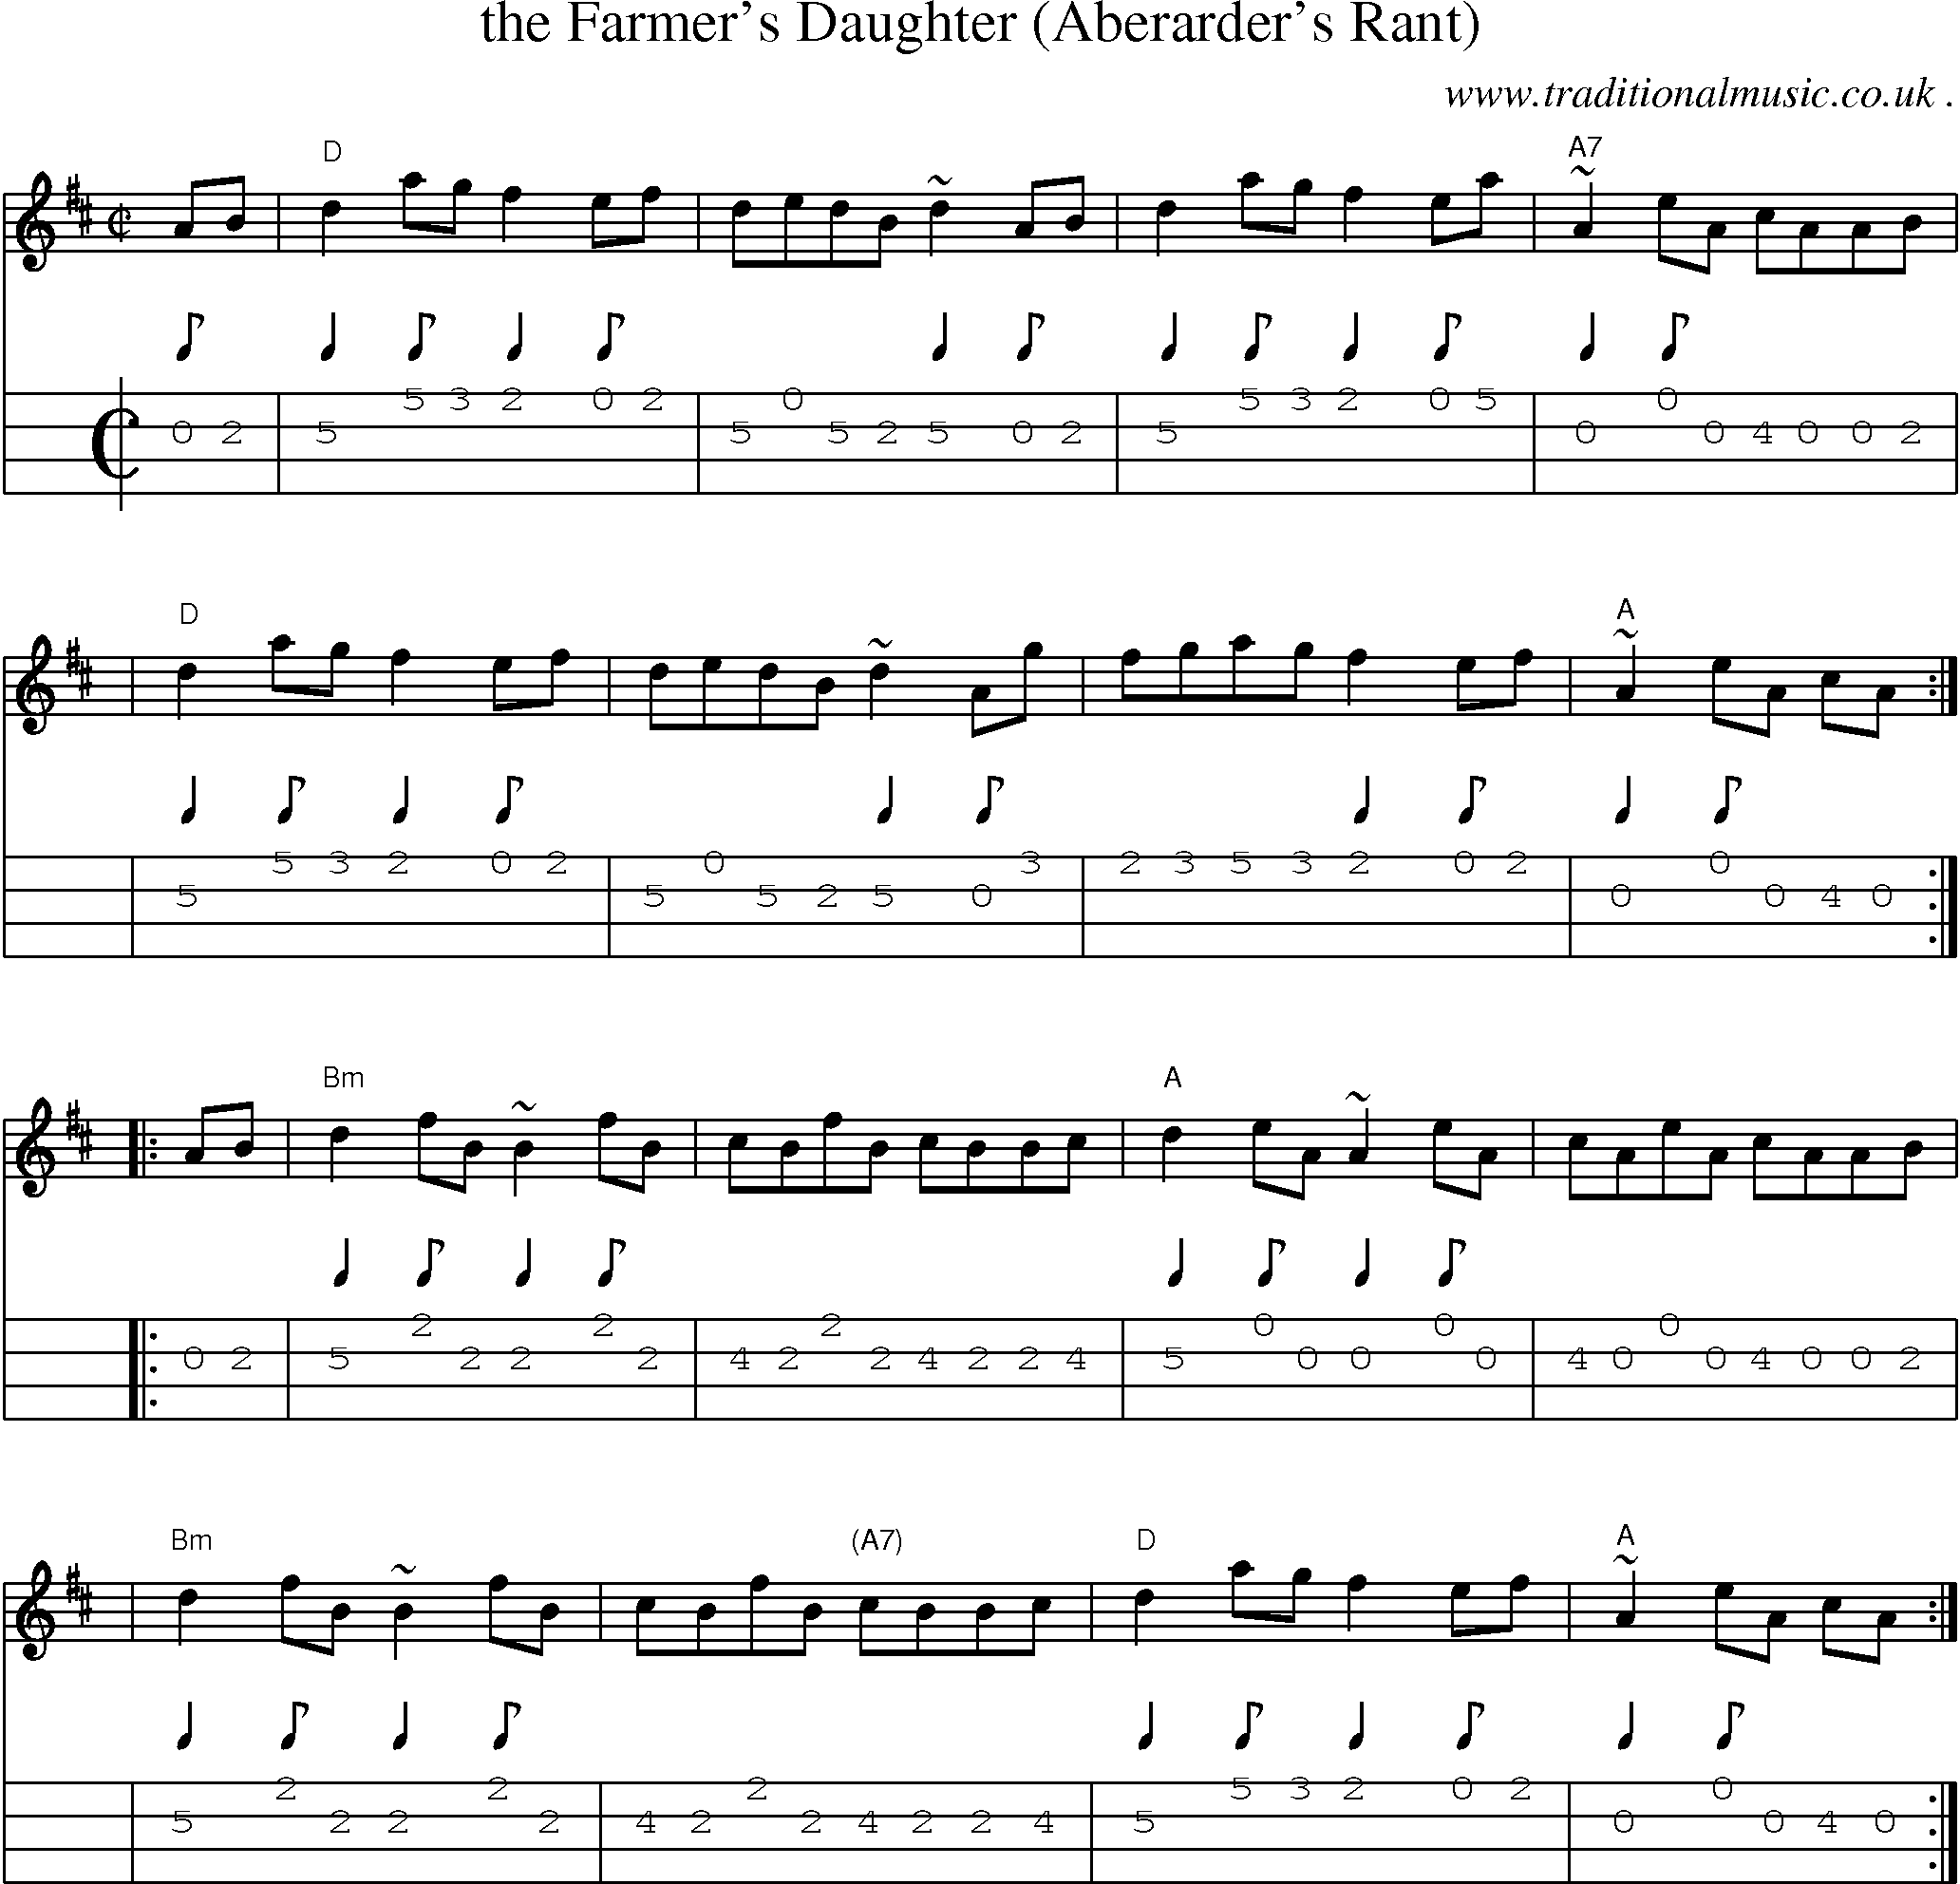 Sheet-music  score, Chords and Mandolin Tabs for The Farmers Daughter Aberarders Rant